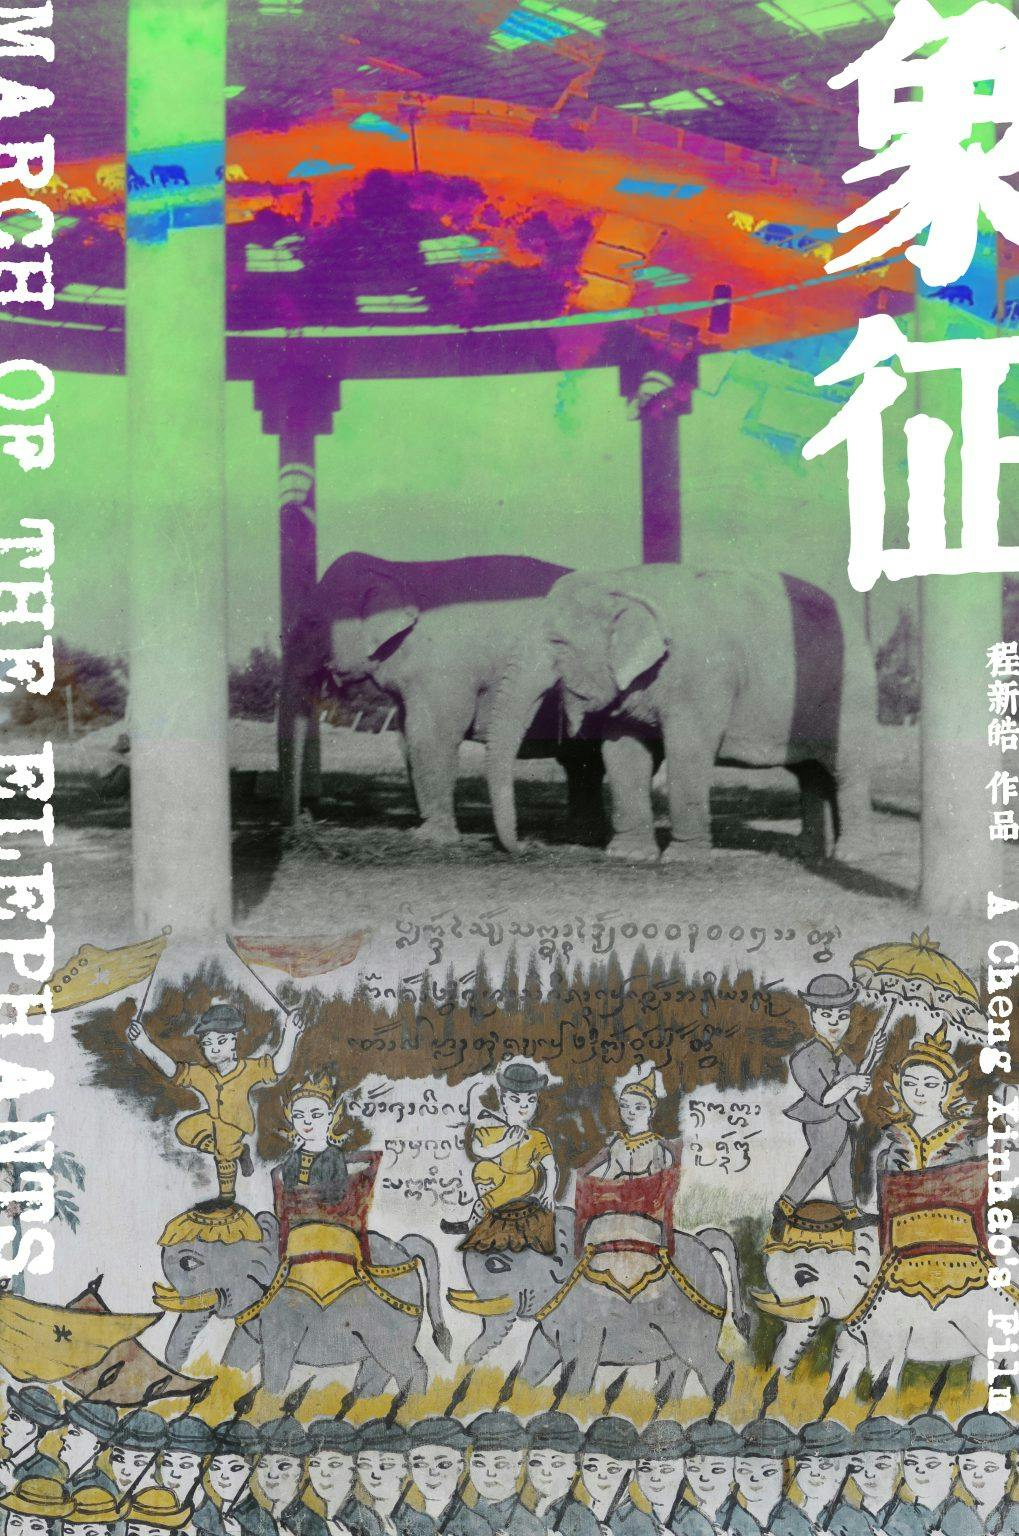 March of the Elephants 象征